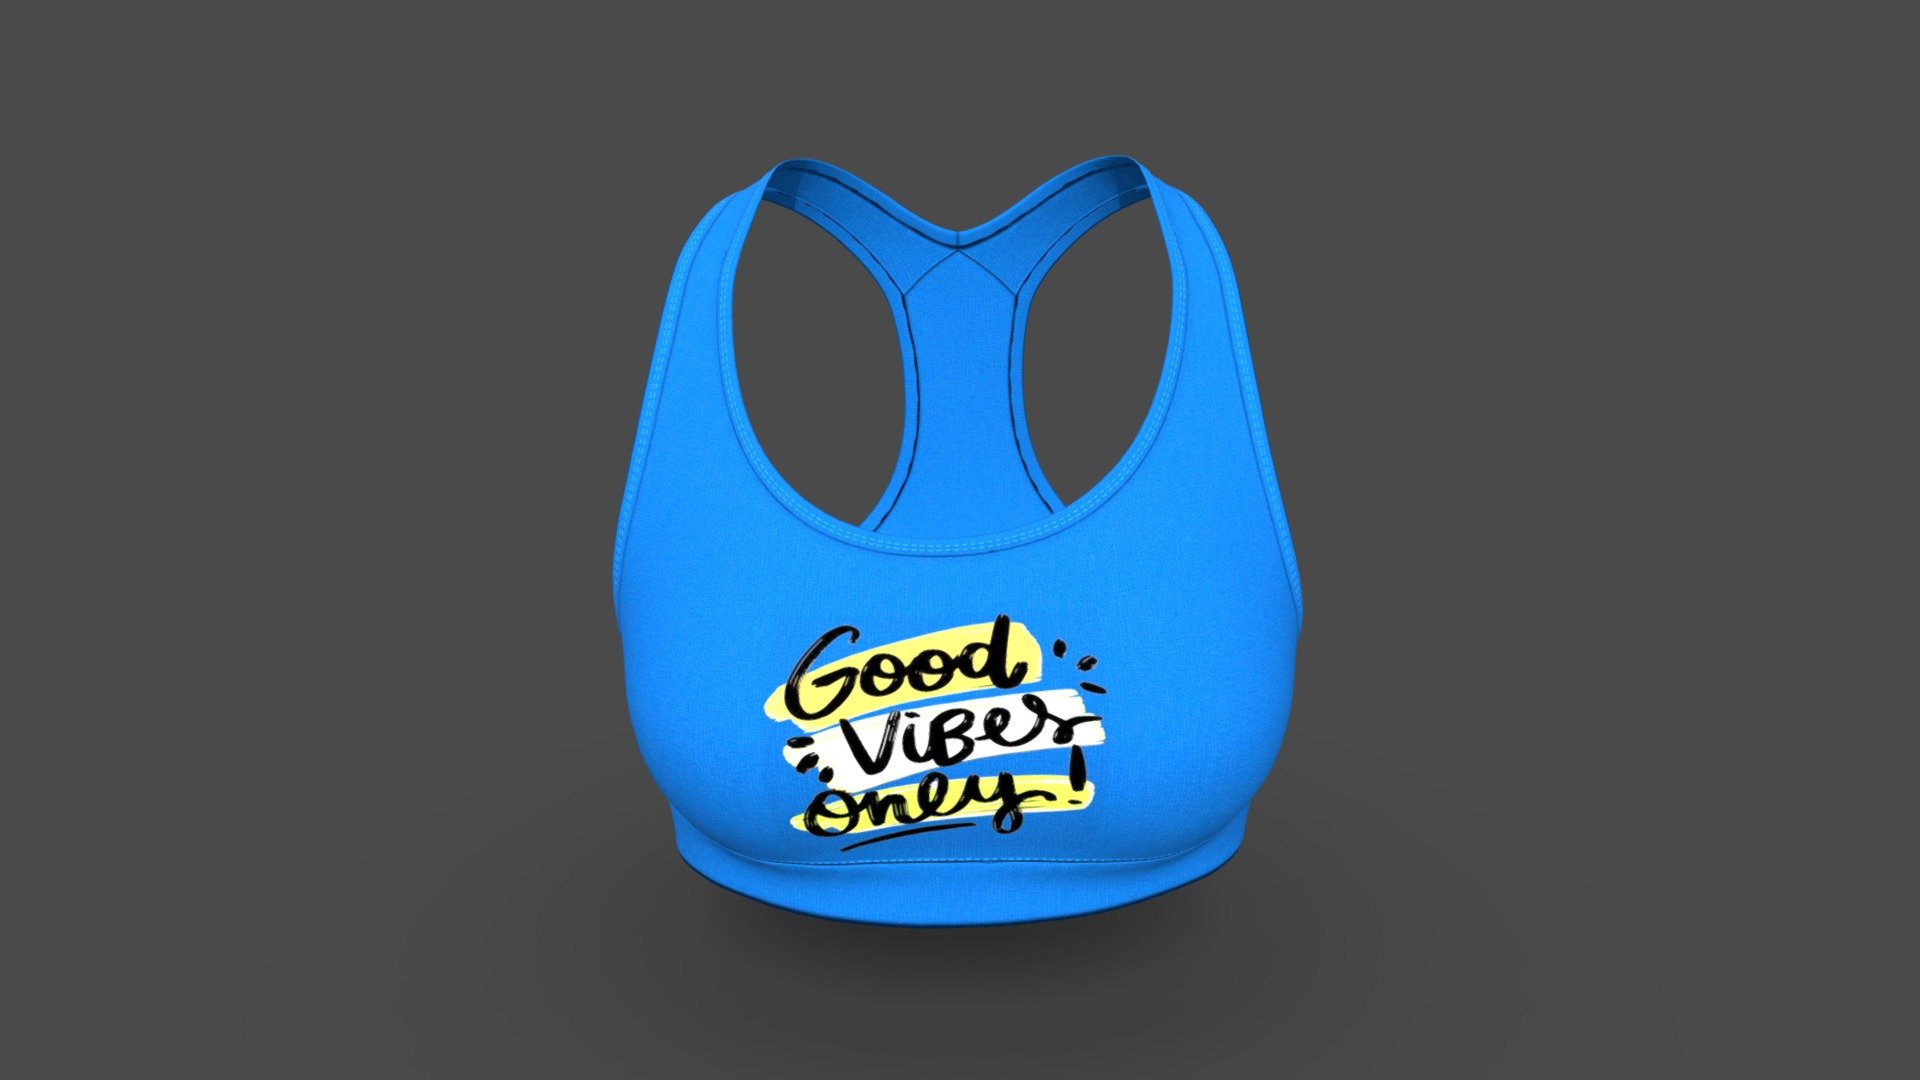 Women Sports Bra
Version V1.0

Realistic high detailed Womens Sports Bra with high resolution textures. Model created by our unique processing &amp; Optimized for 3D web and AR / VR

Features

Optimized &amp; NON-Optimized obj model with 4K texture included




Optimized for AR/VR/MR

4K &amp; 2K fabric texture and details

Optimized model is 946KB

NON-Optimized model is 1.81MB

Knit fabric texture and print details included

GLB file in 2k texture size is 2.62MB

GLB file in 4k texture size is 10.8MB (Game &amp; Animation Ready)

Suitable for web application configurator development.

Fully unwrap UV

The model has 1 material

Includes high detailed normal map

Unit measurment was inch

Triangular Mesh with 14.7k Vertices

Texture map: Base color, OcclusionRoughnessMetallic(ORM), Normal

Tpose  available on request

For more details or custom order send email: hello@binarycloth.com


Website:binarycloth.com - Women Sports Bra - Buy Royalty Free 3D model by BINARYCLOTH (@binaryclothofficial) 3d model